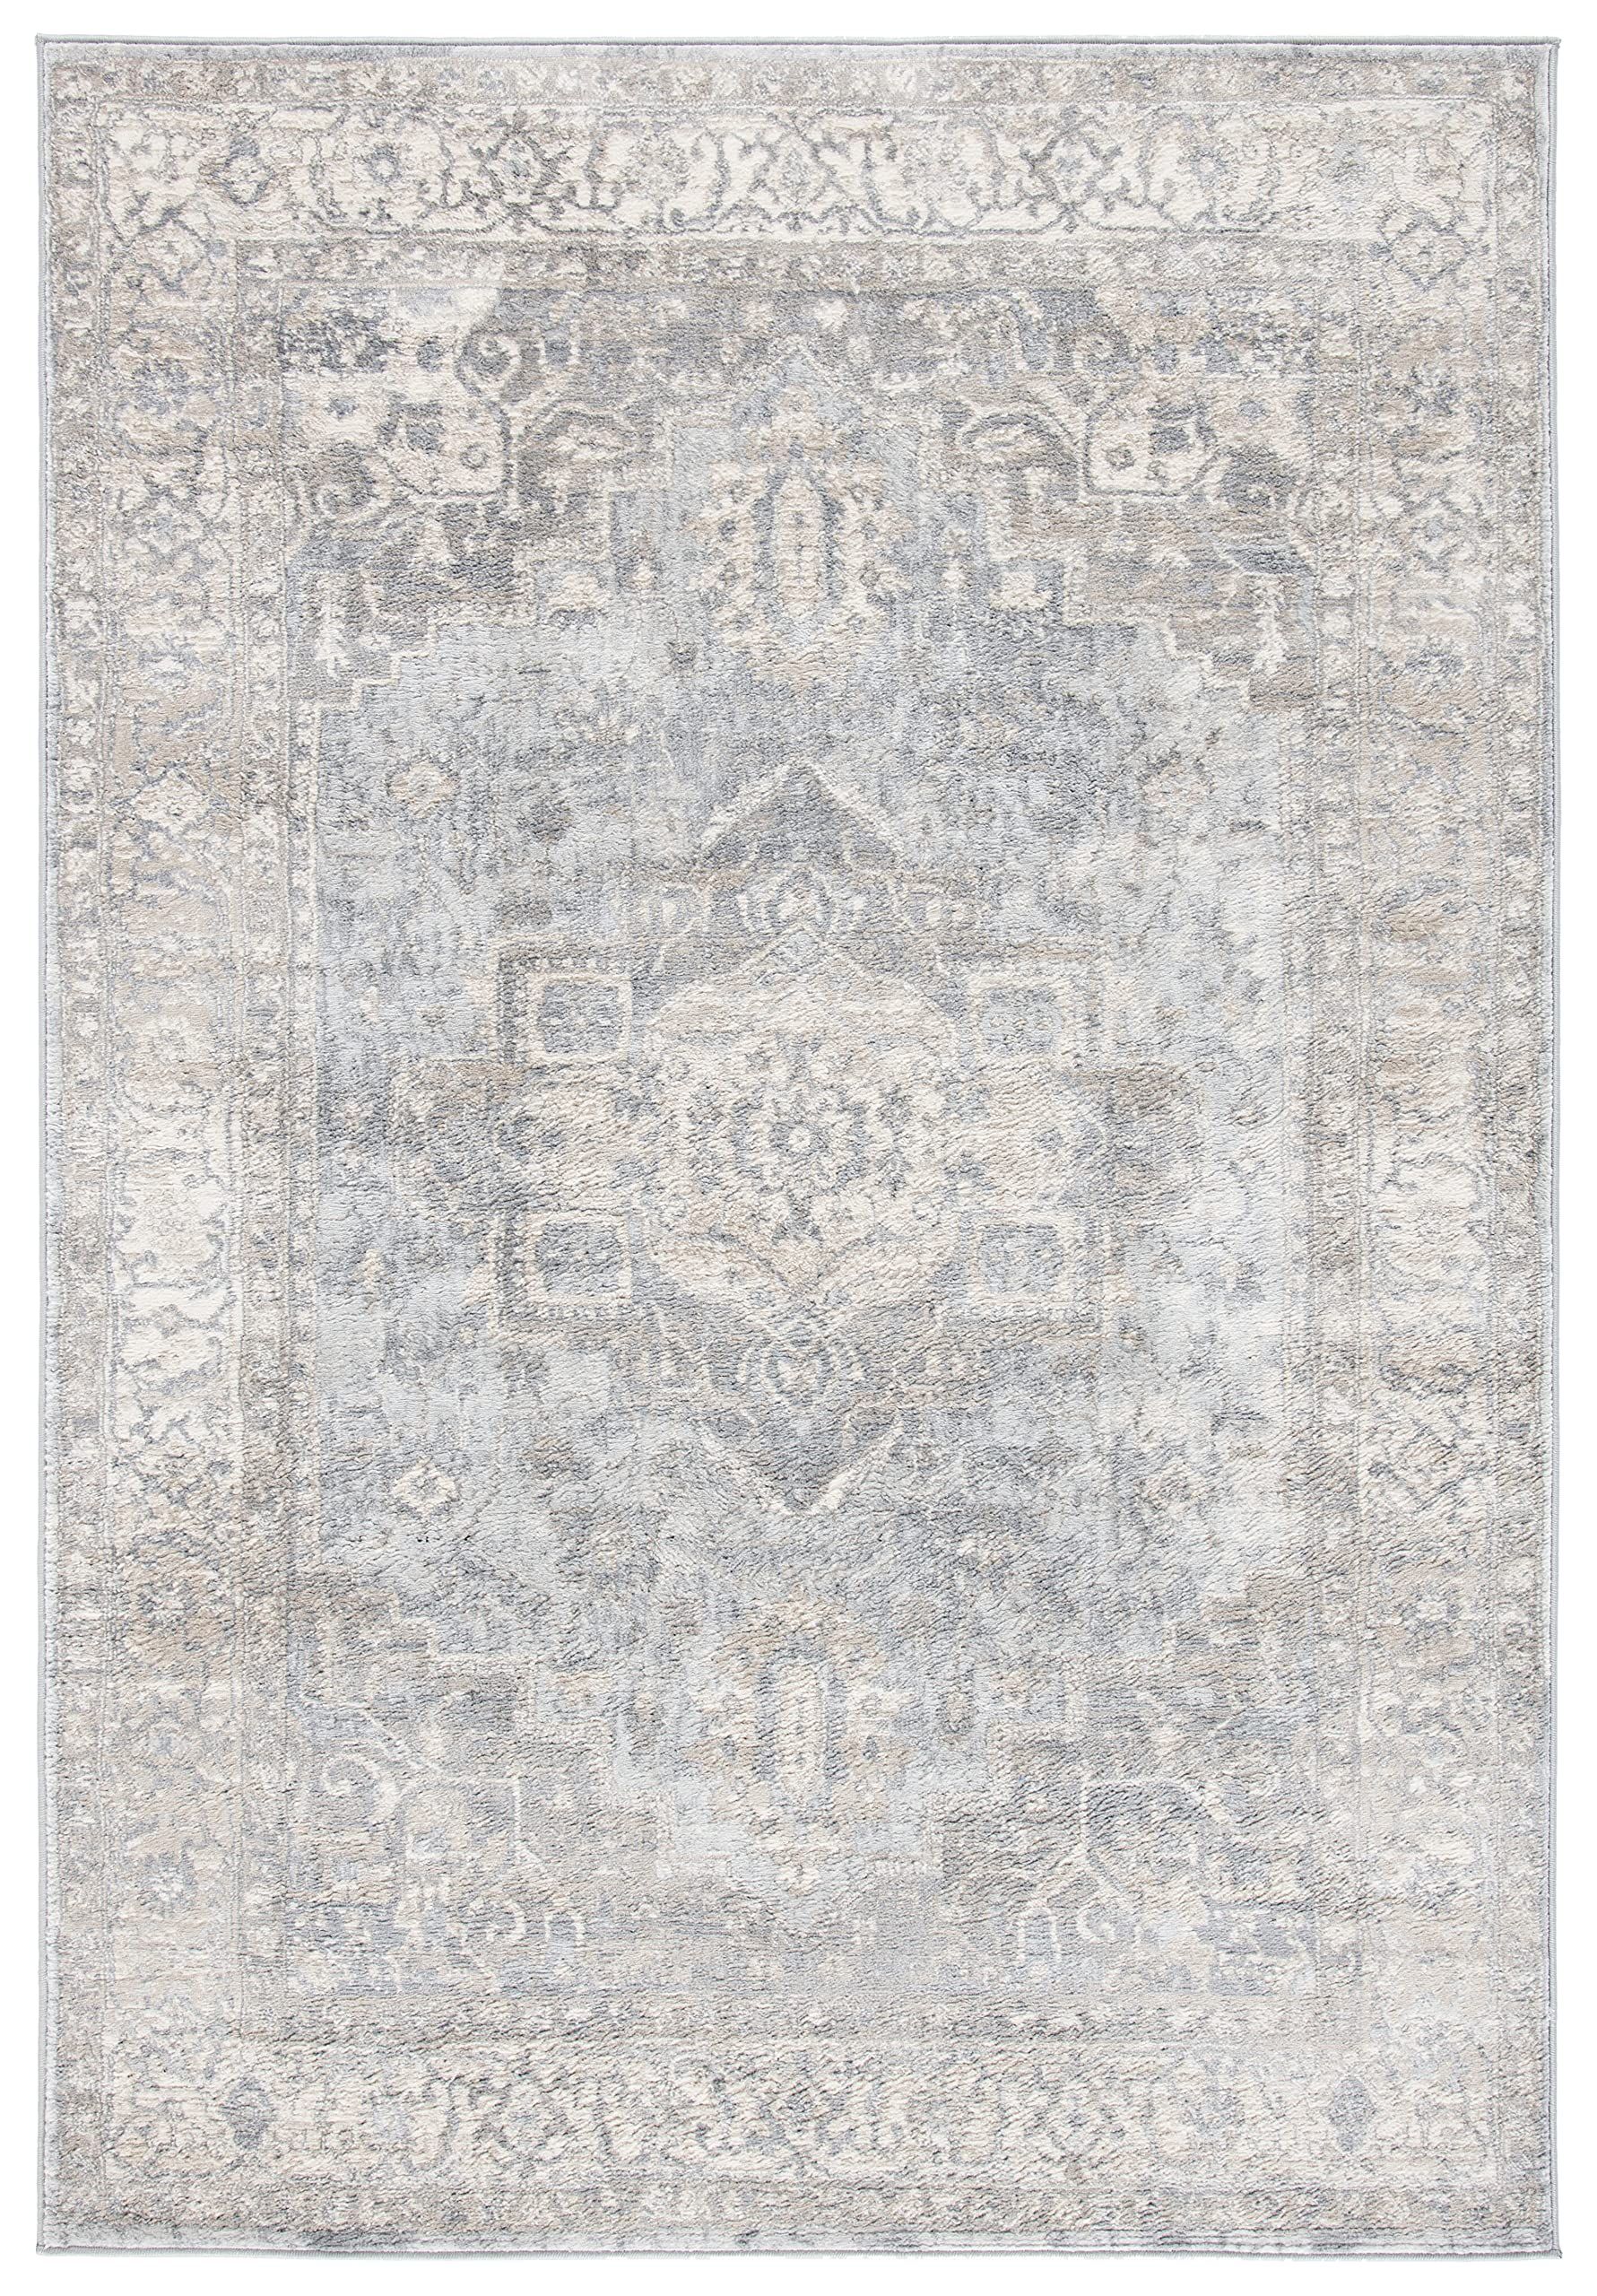 SAFAVIEH Brentwood Collection BNT851F Medallion Distressed Non-Shedding Living Room Dining Bedroom A | Amazon (US)